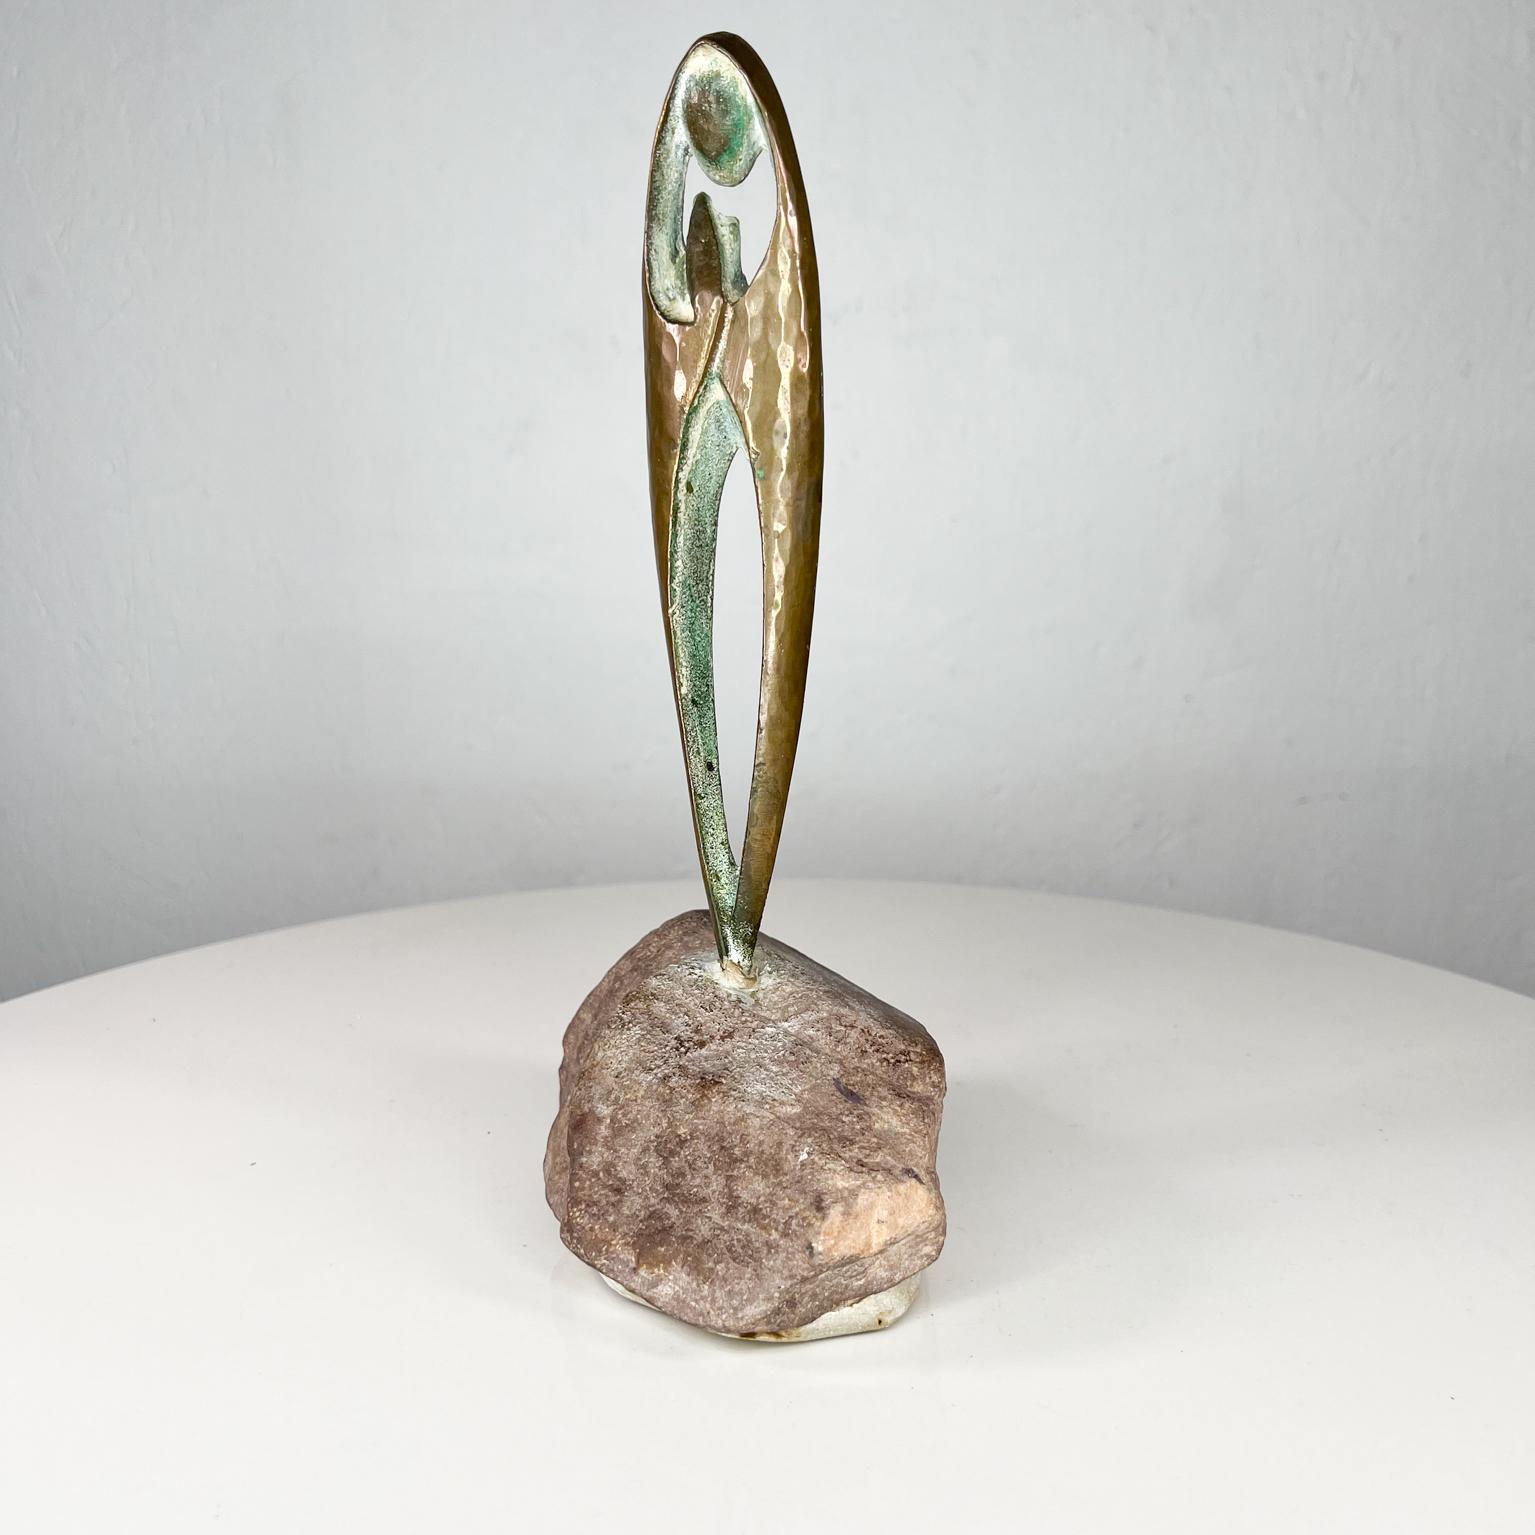 Modern Art Ireland bronze sculpture Madonna and child on rock base
Stamped, made in the Republic of Ireland Hard to read.
Beautiful bronze sculpture of Madonna and Child, Mounted on a rock.
Measures: 10.75 tall x 5.5 width x 4 depth
Preowned